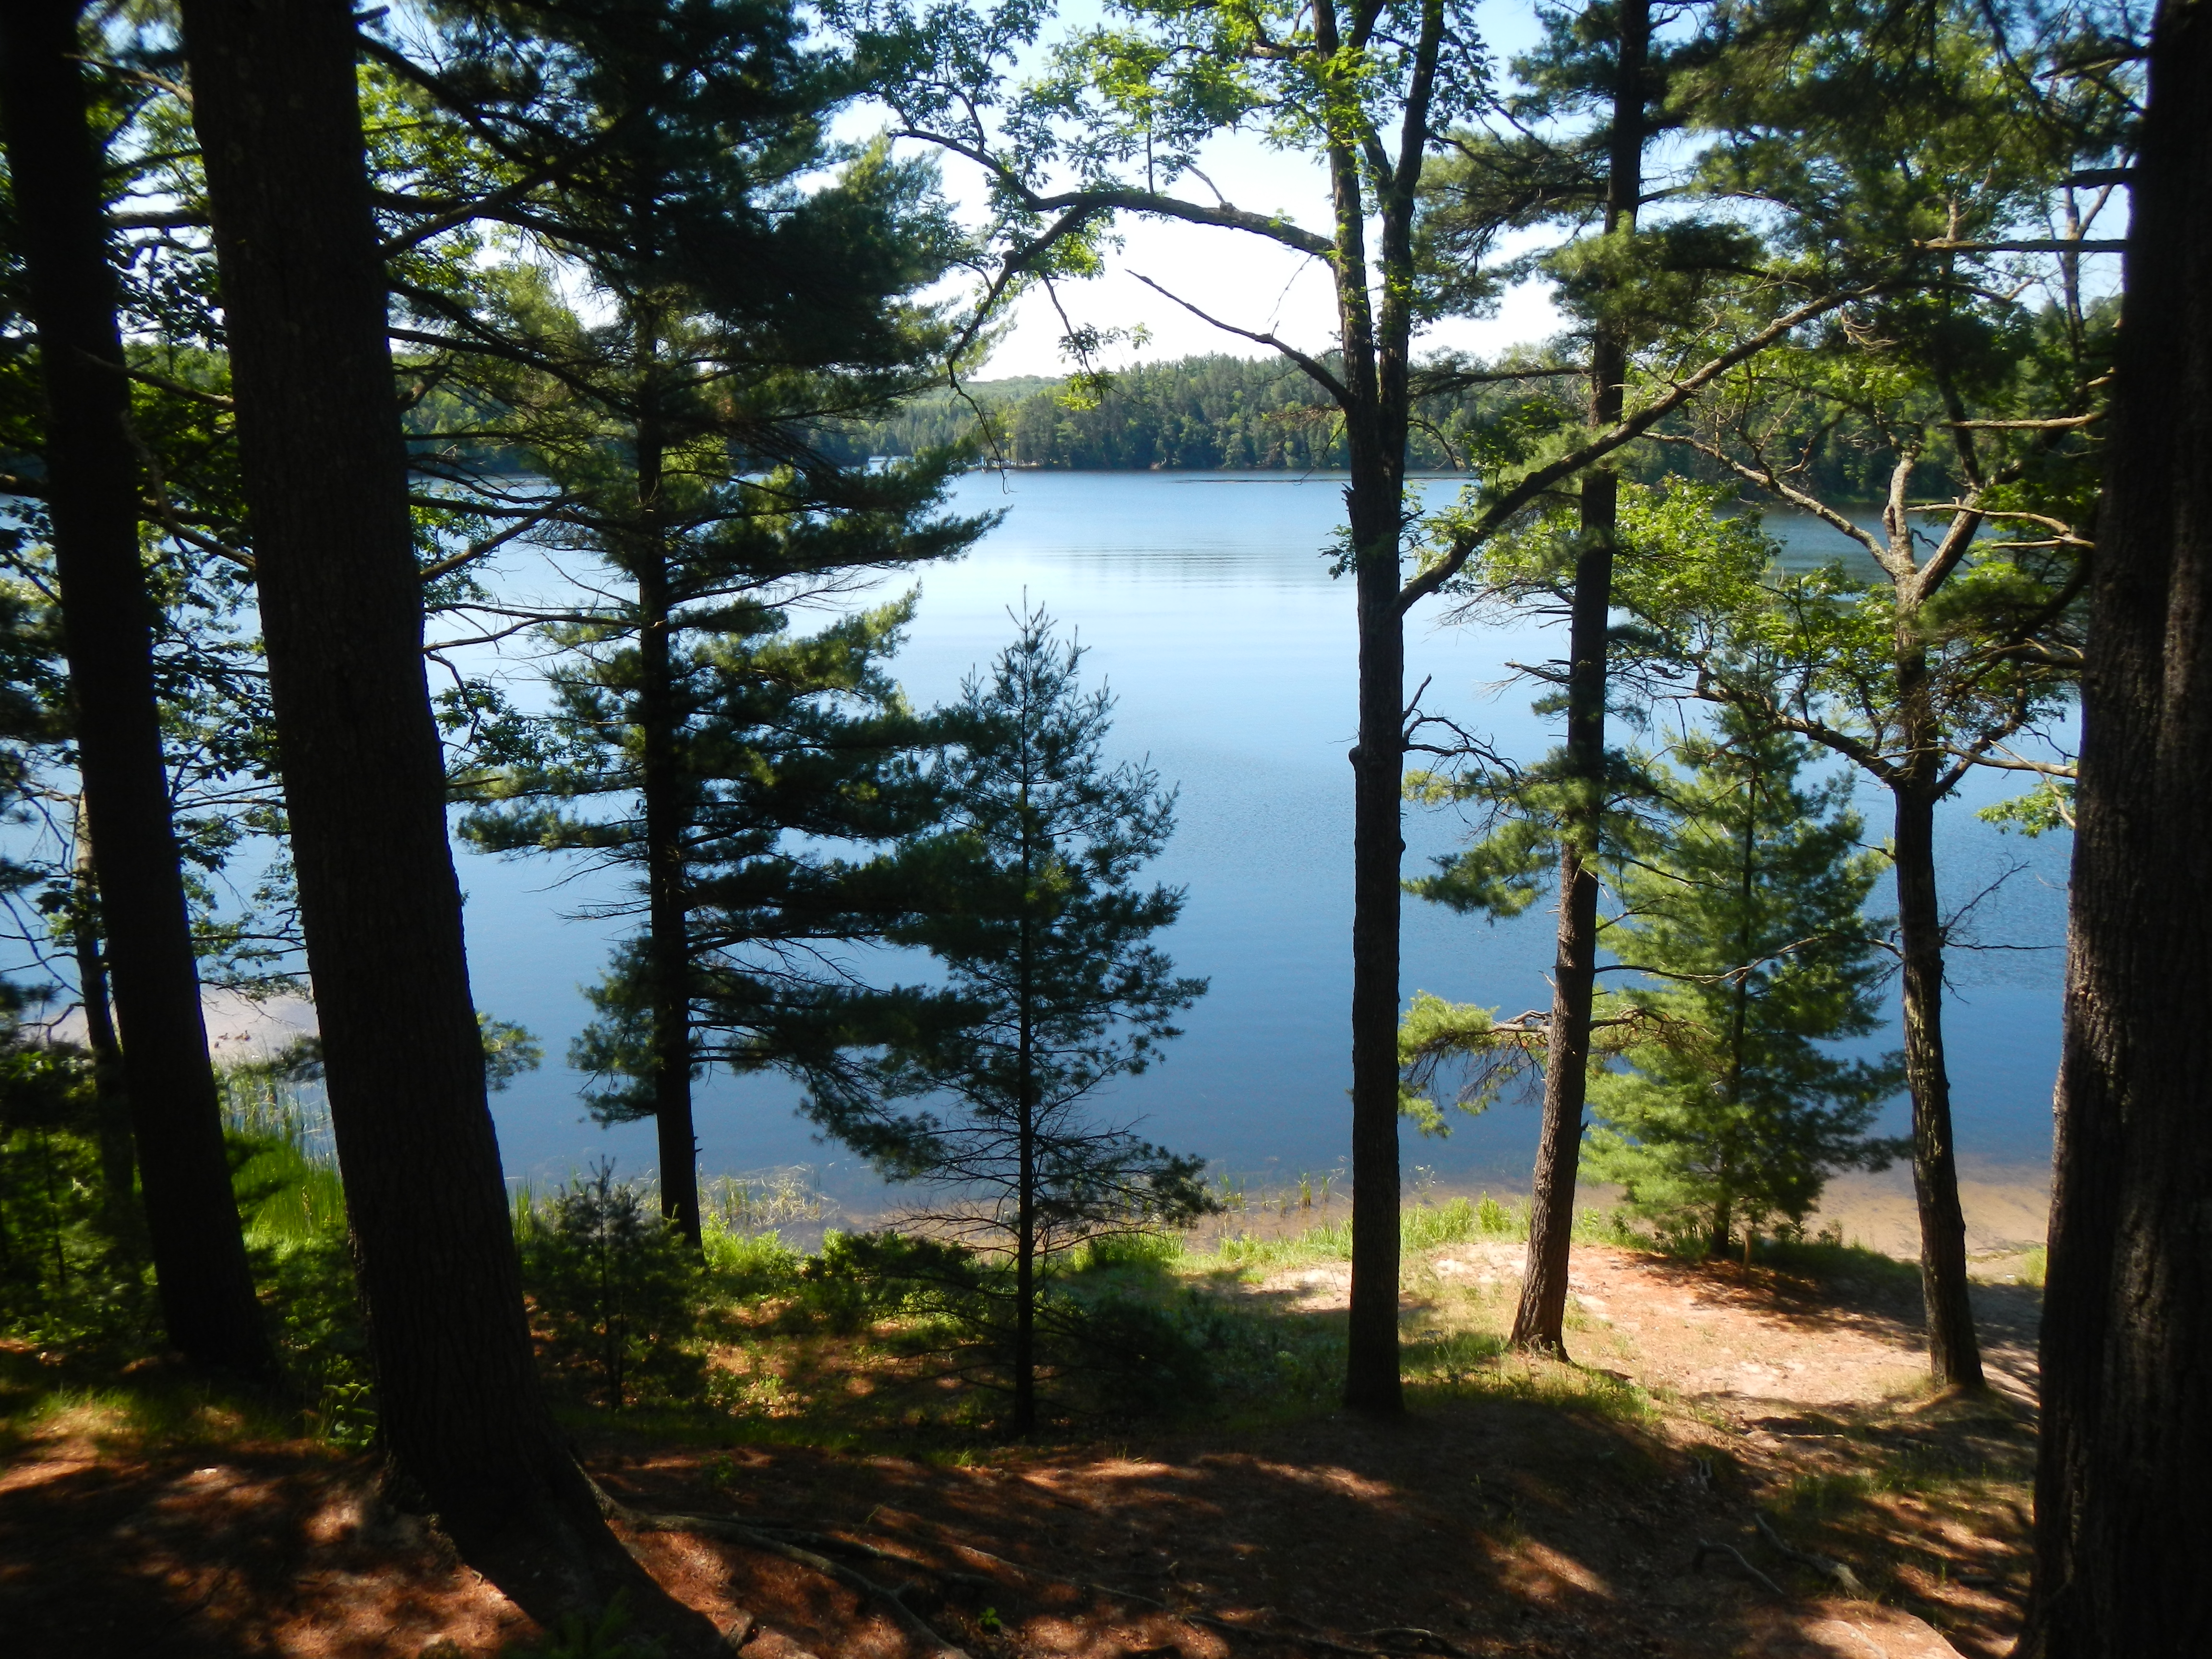 A two-track to primitive campsites on the north shore of Foote Pond led us here